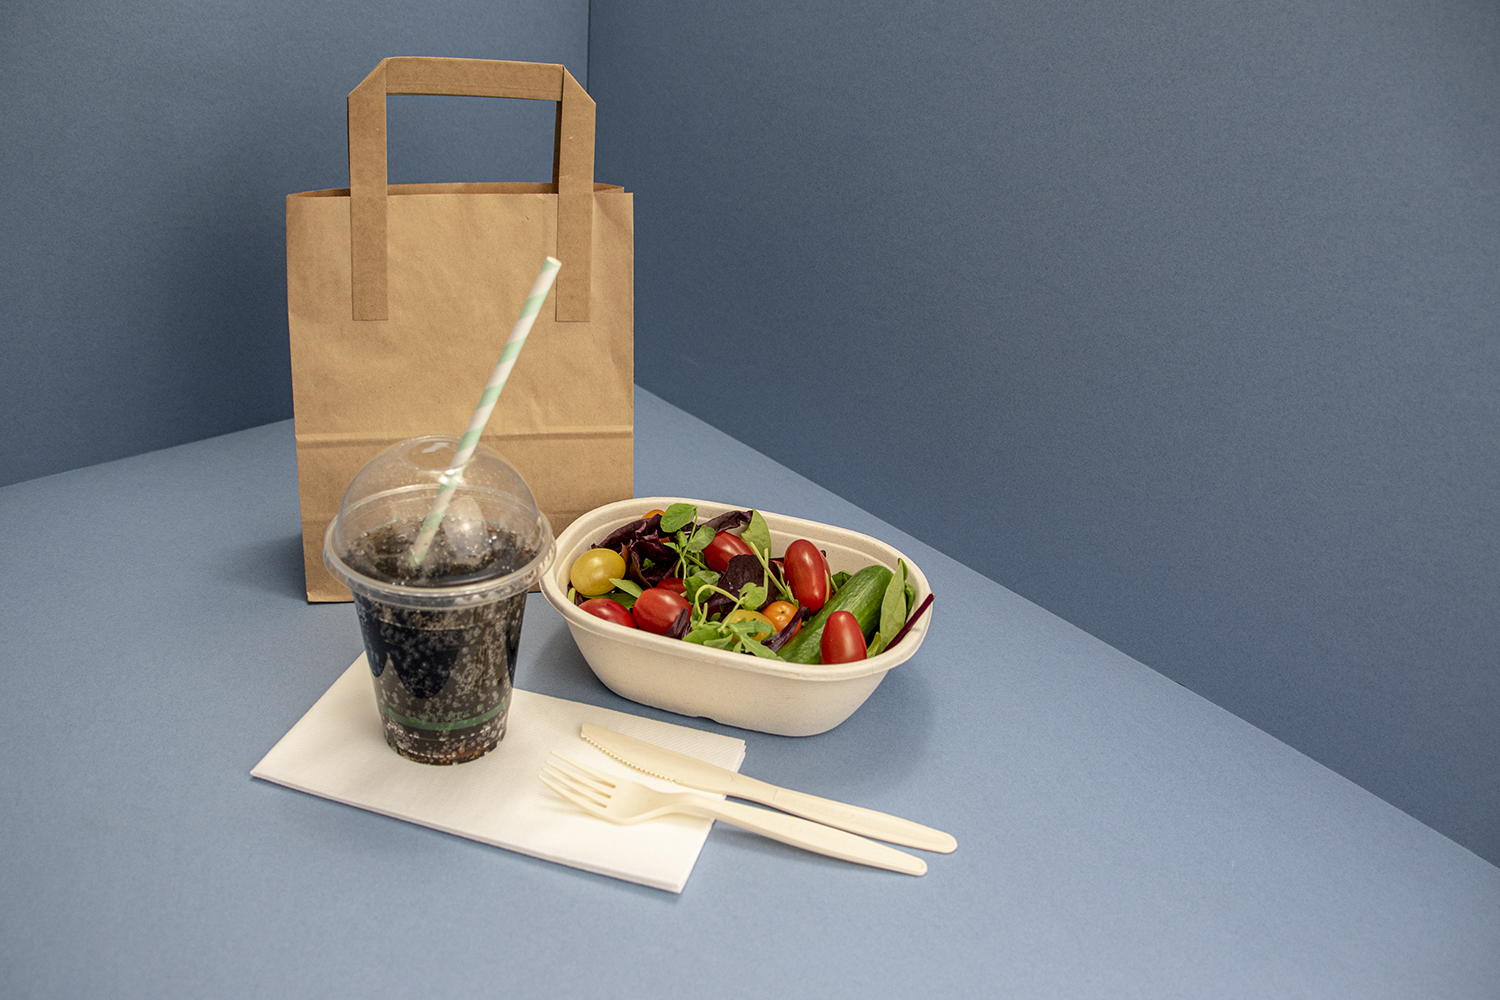 3 Easy Ways to Make Your Takeaway Business More Eco-Friendly in 2021